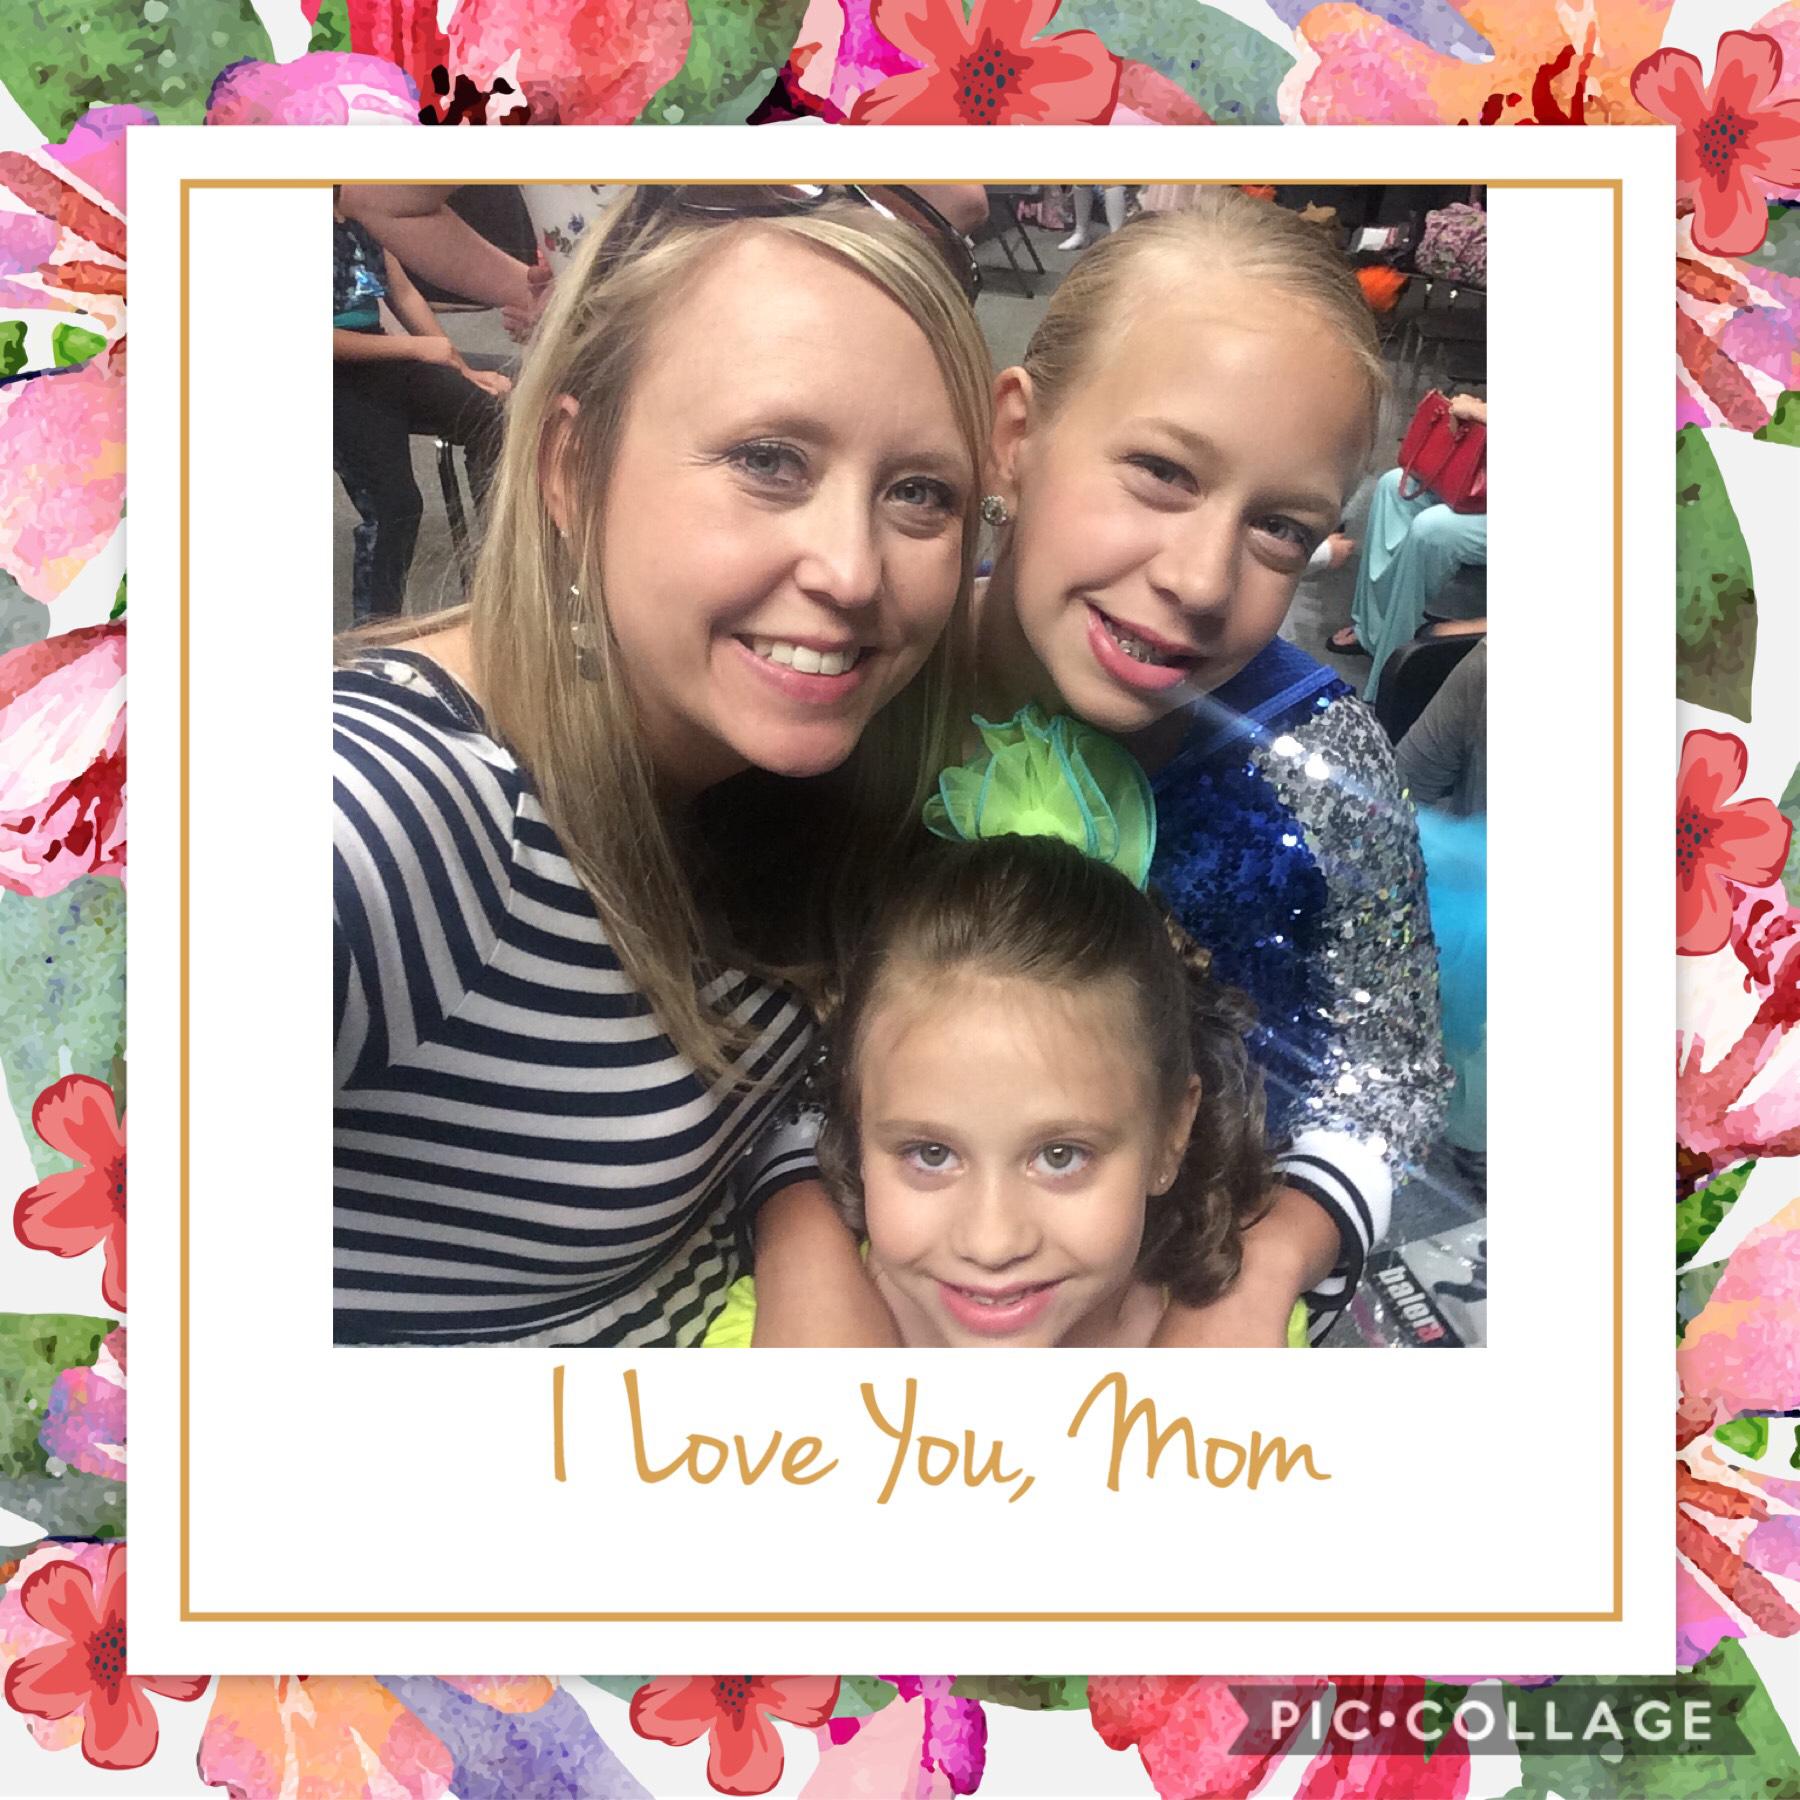 Thank you for all that you do for me! I love you so much! And I don’t know what I would do without you! Ilysm , mom !!! ❤️❤️❤️❤️❤️❤️❤️❤️❤️❤️❤️❤️❤️❤️